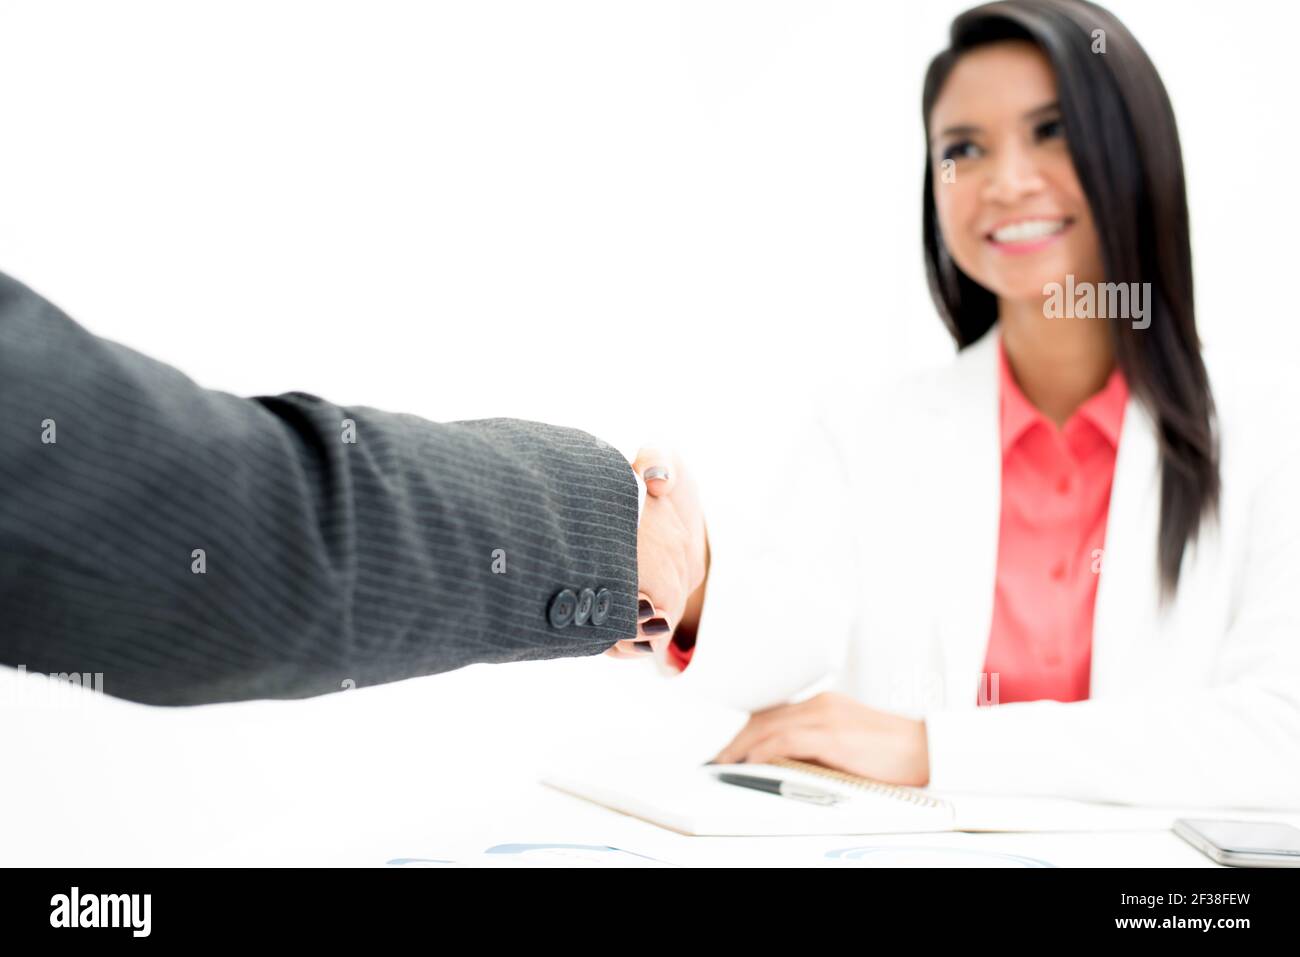 Hand of businessman making handshake with a businesswoman Stock Photo